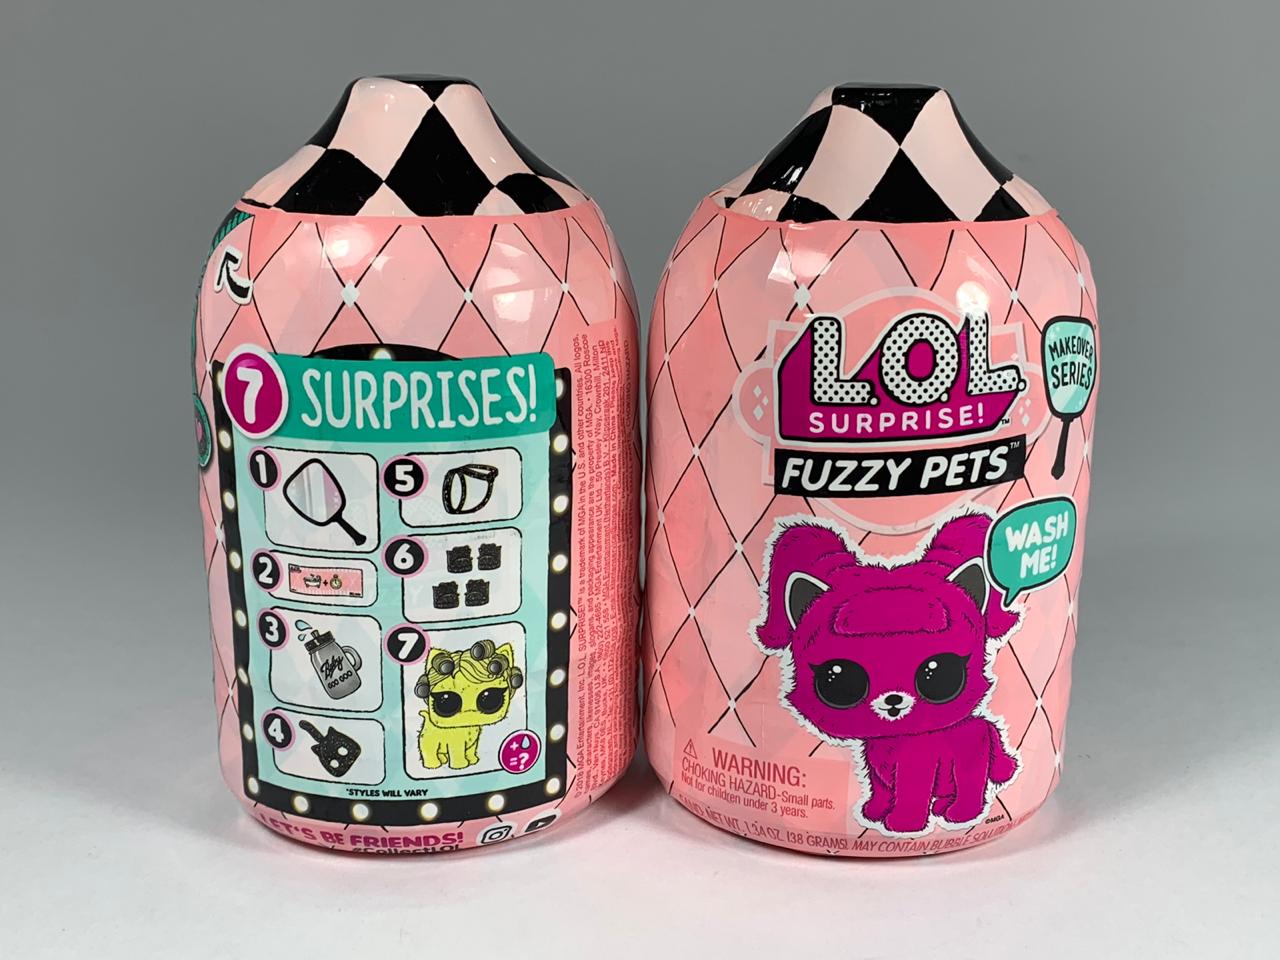 L.O.L. Surprise! - Fuzzy Pets - The Gift Shop Costa Rica